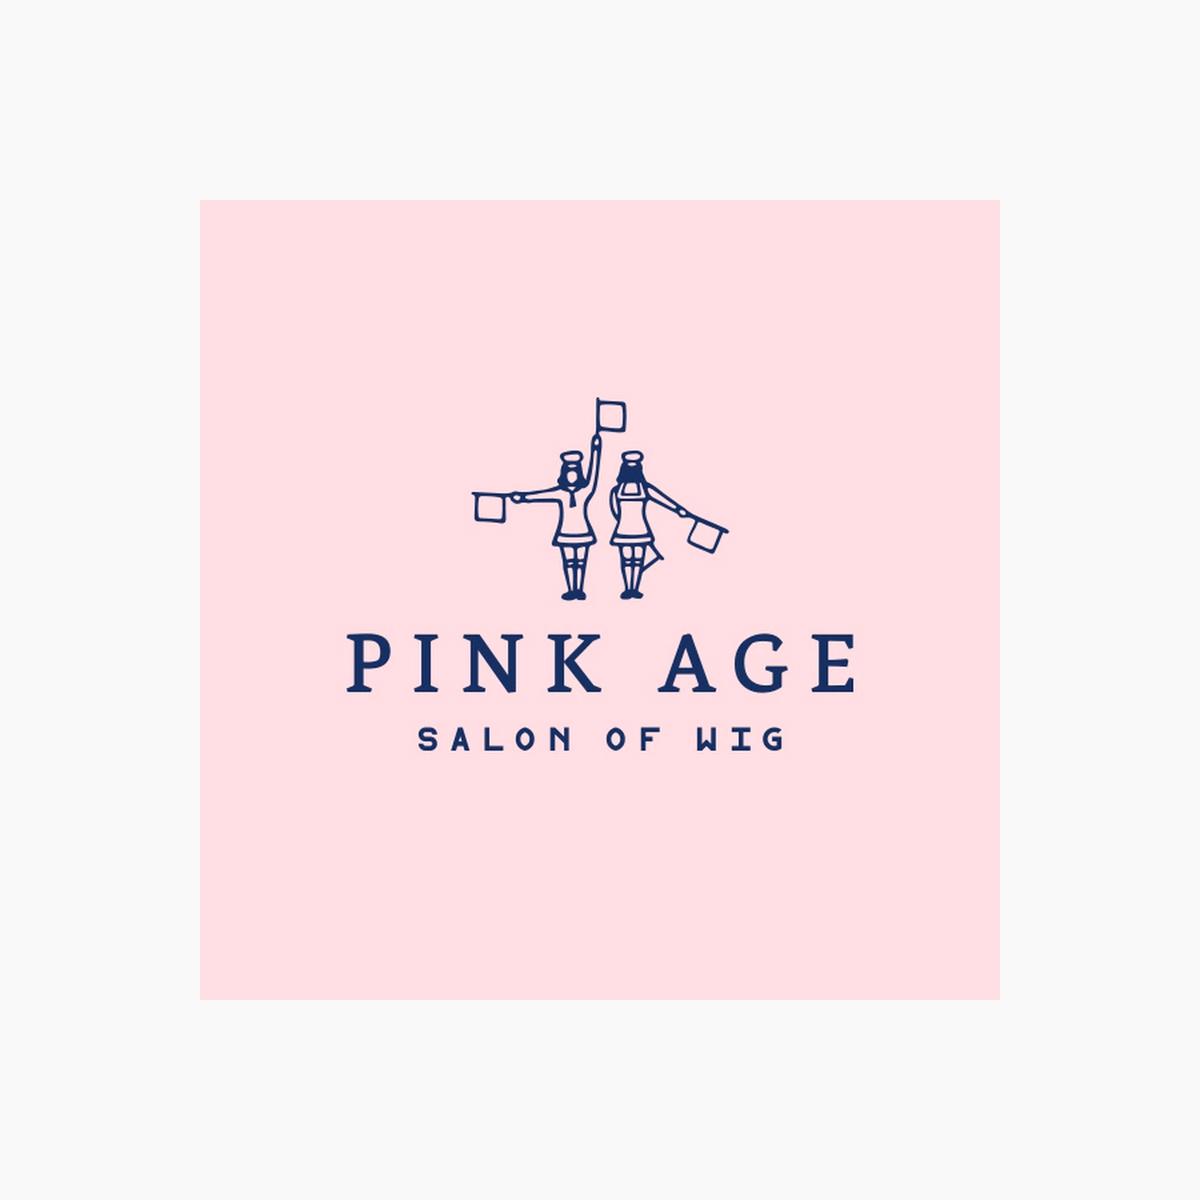 PINK AGE